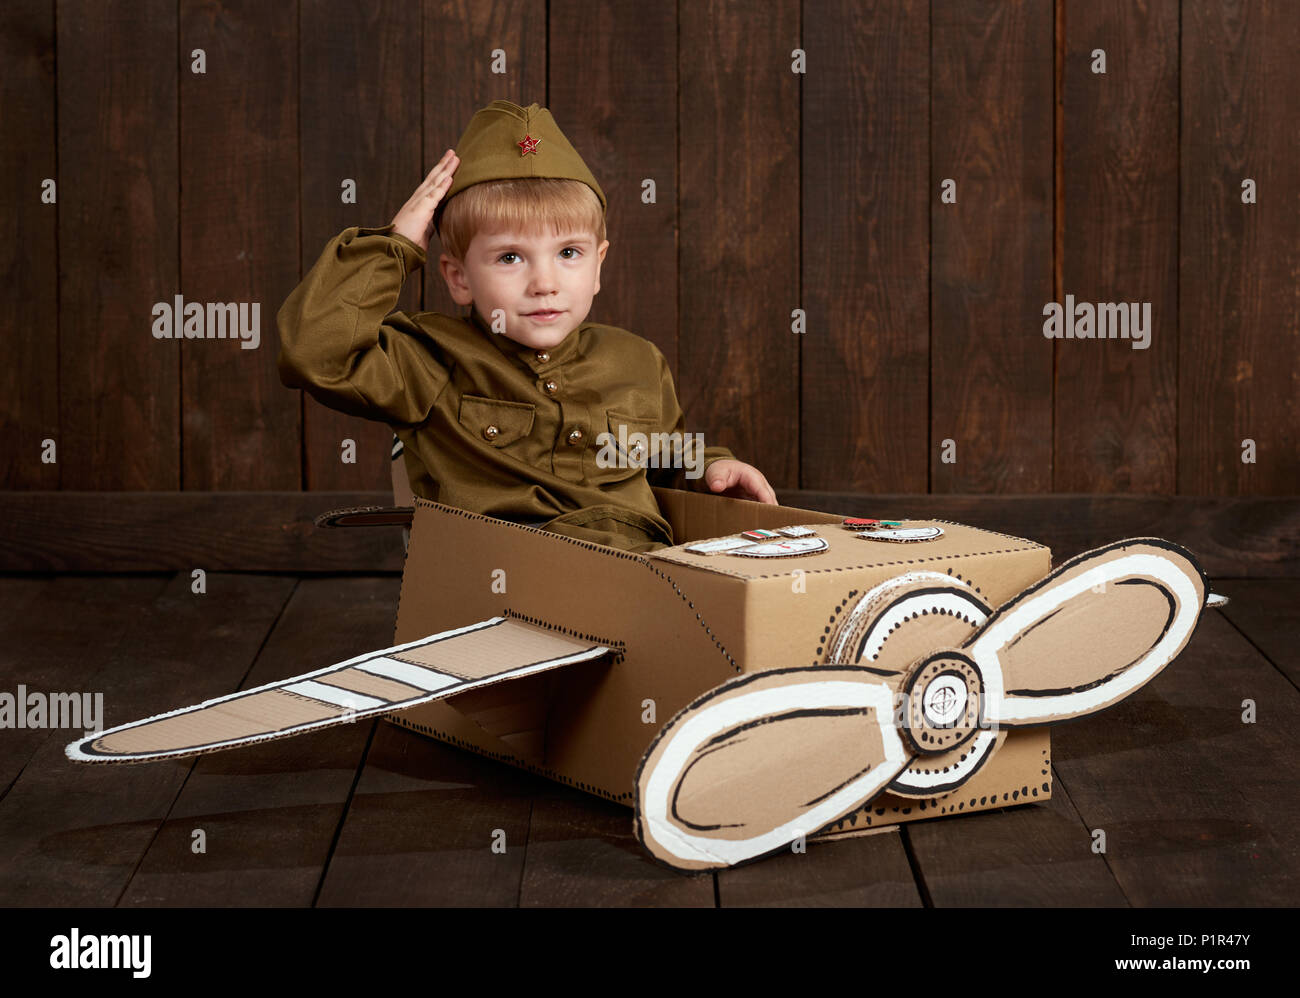 children boy are dressed as soldier in retro military uniforms sit in an airplane made of cardboard box and dreams of becoming a pilot, dark wood back Stock Photo